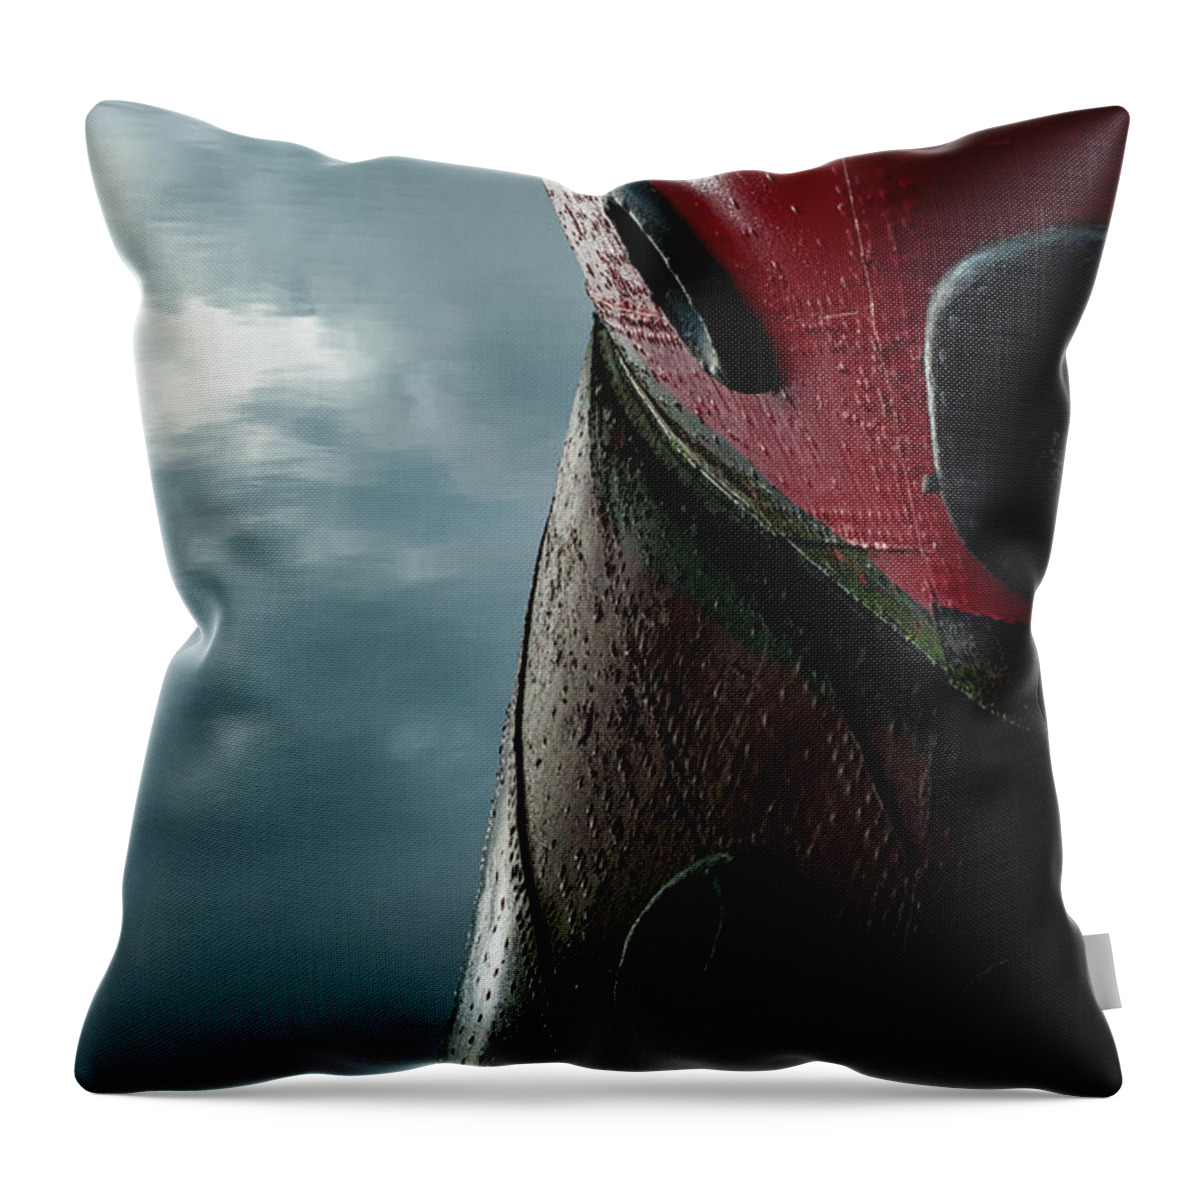 Boat Throw Pillow featuring the photograph Lightship by Gavin Lewis